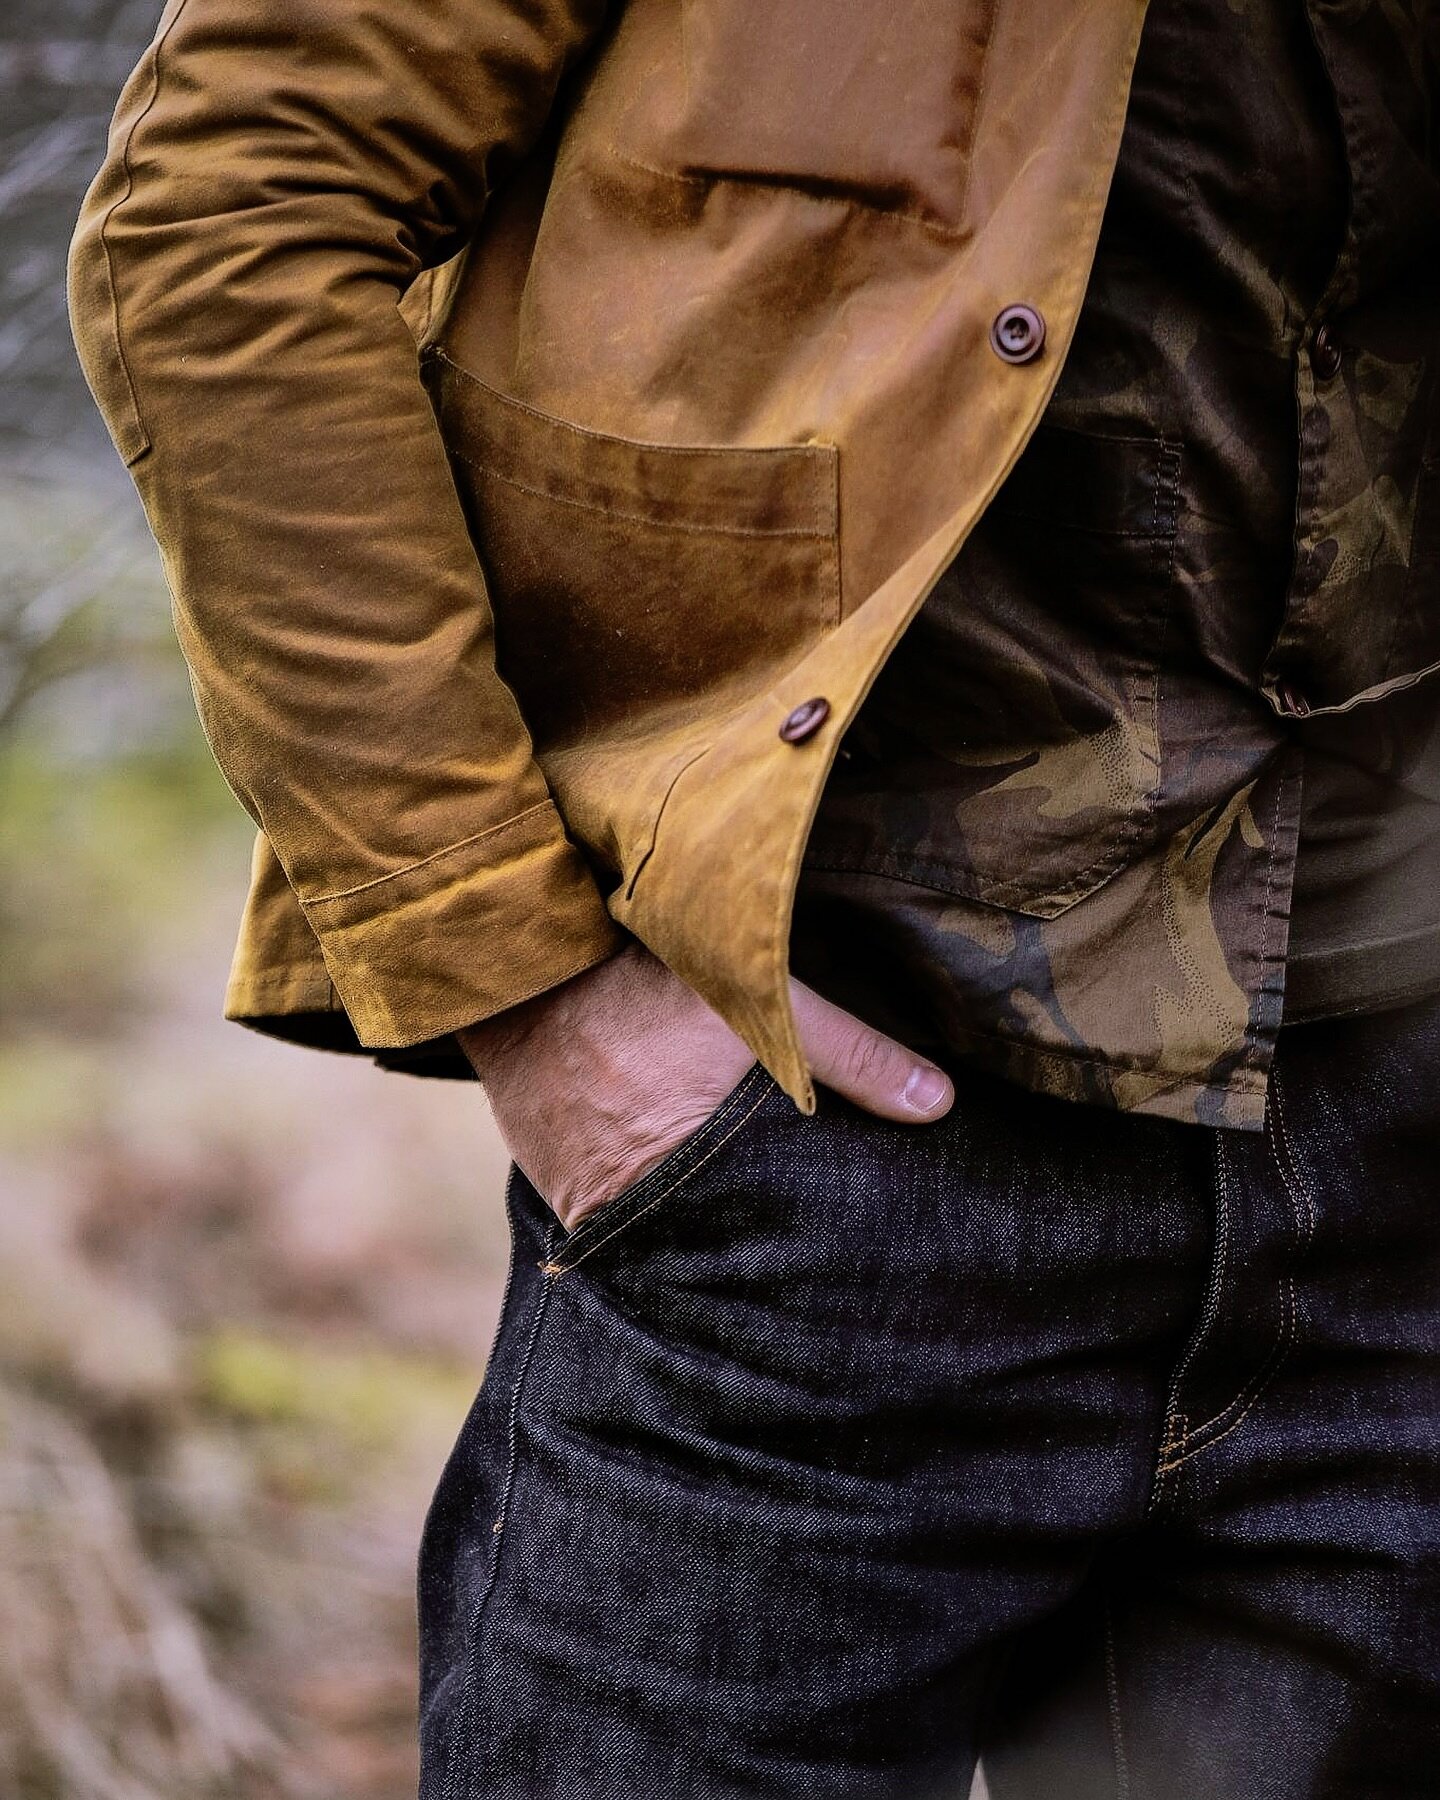 Antique Yellow Waxed Chore Coat
Camouflage Dry Wax Chore Coat/ Overshirt
18oz LFT Japanese Selvedge Denim

Antique Wax Chore Coat - 5 colours
Waxed Fabric @halleystevensons 
Corozo Nut Buttons @courtneycobuttonmakers 
Sizes S -5XL

Military &amp; Wor